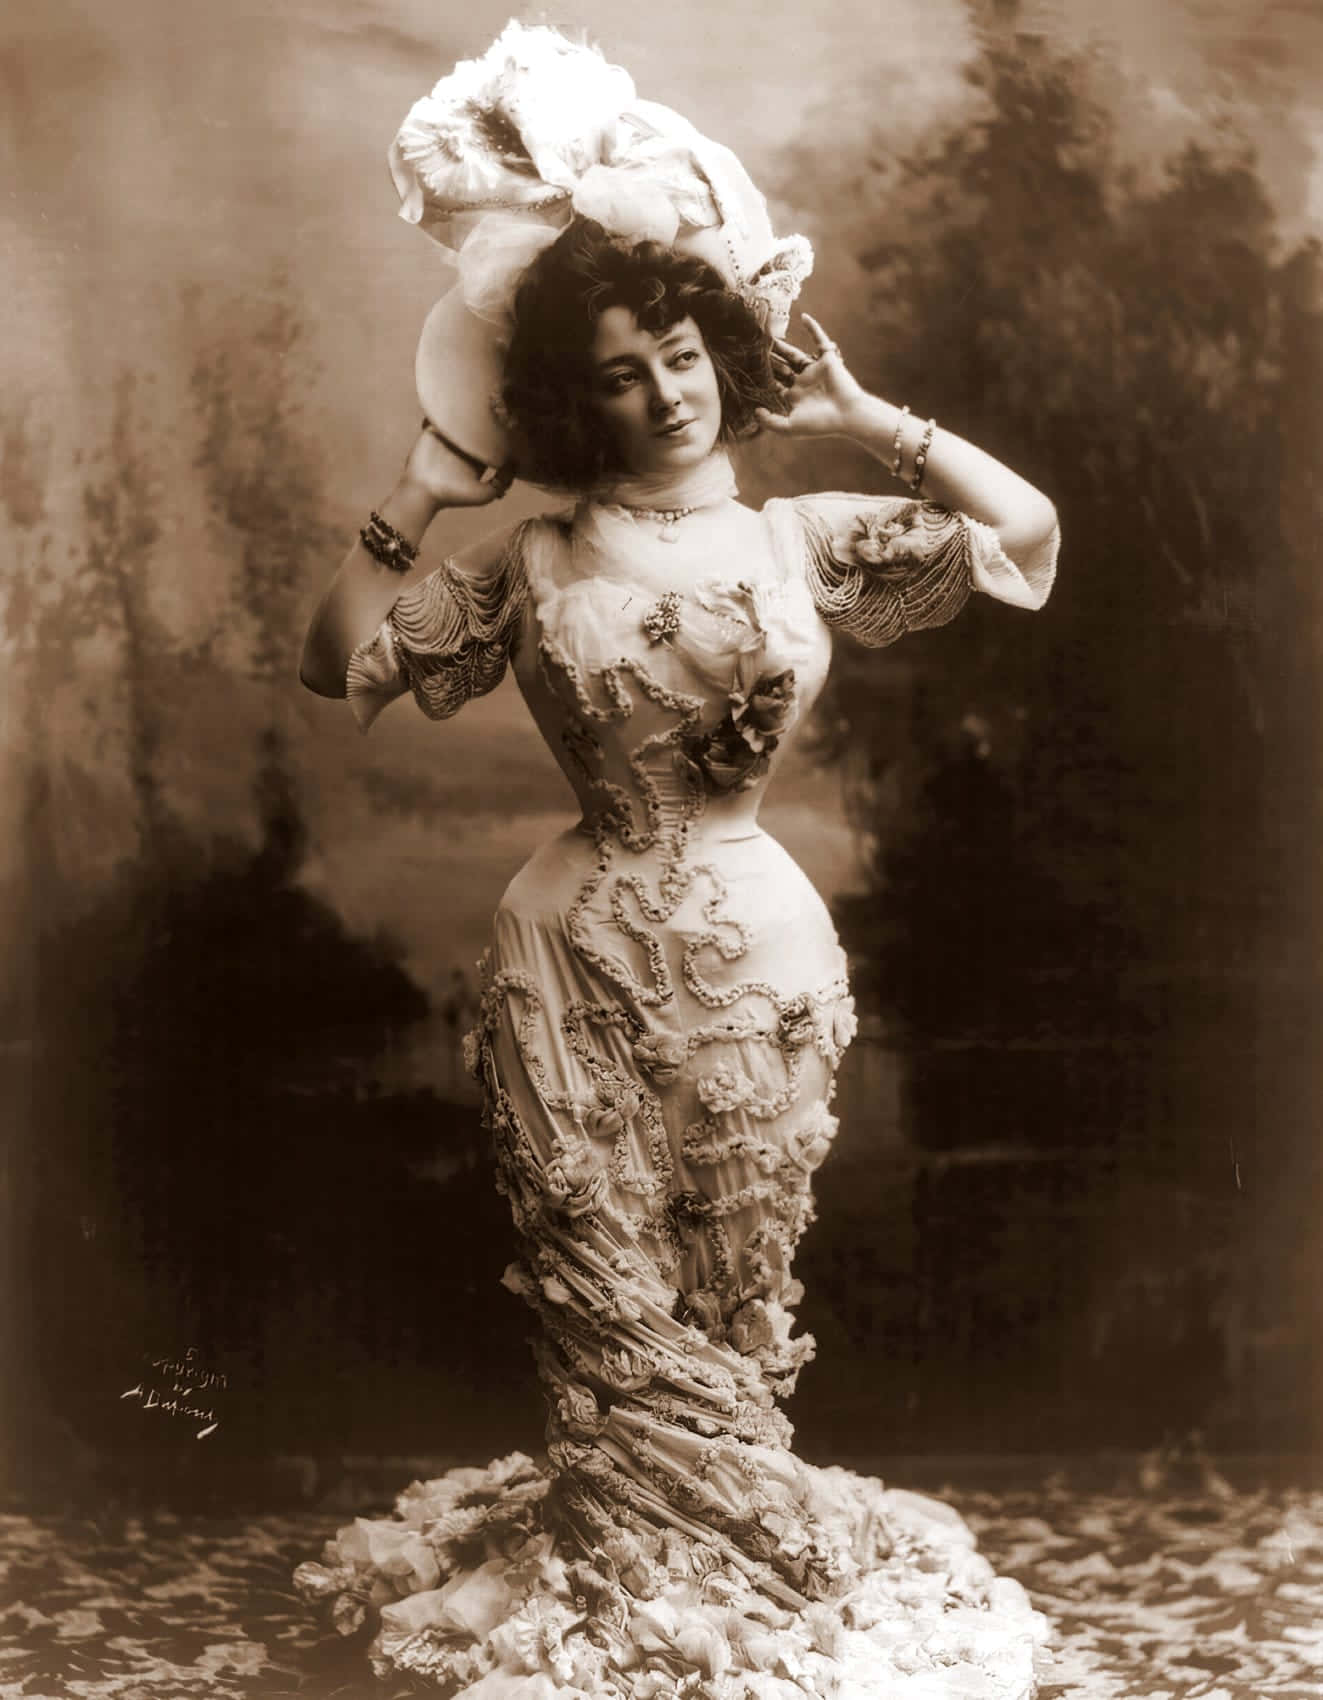 A Woman In A Dress With A Hat On Her Head